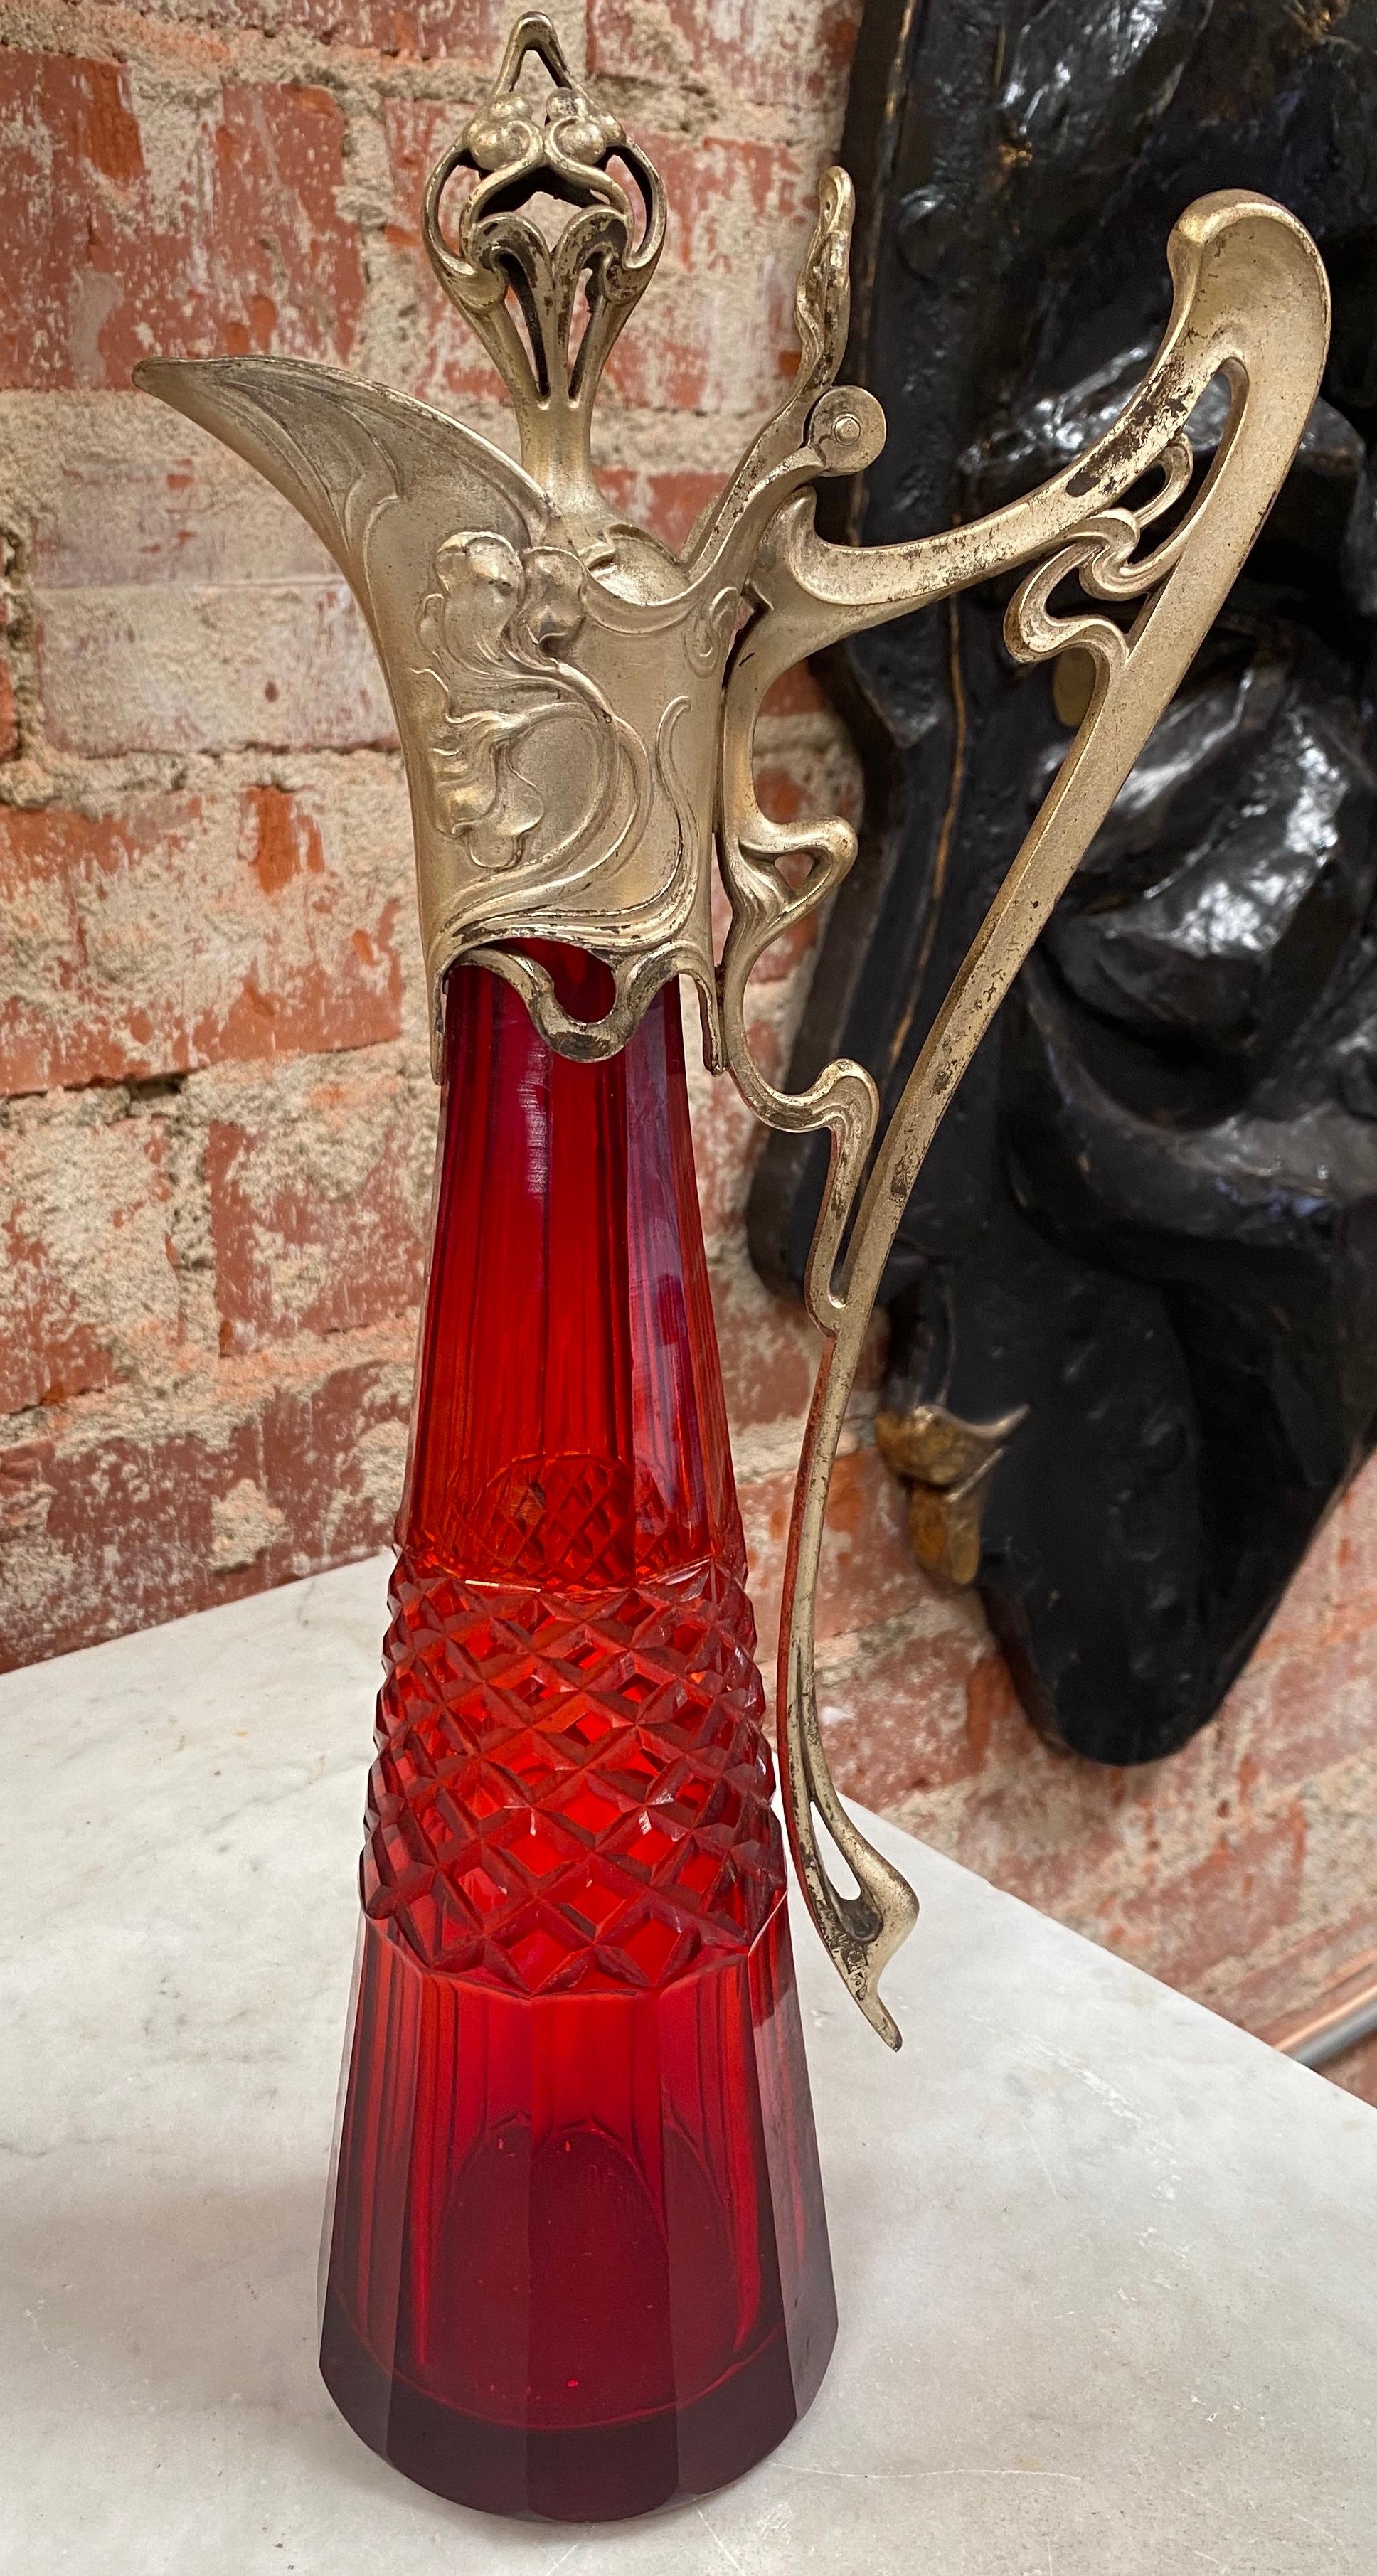 Beautiful vintage handmade Italian decanter made with a crystal red glass the bottle has an amazing shape. Stunning.